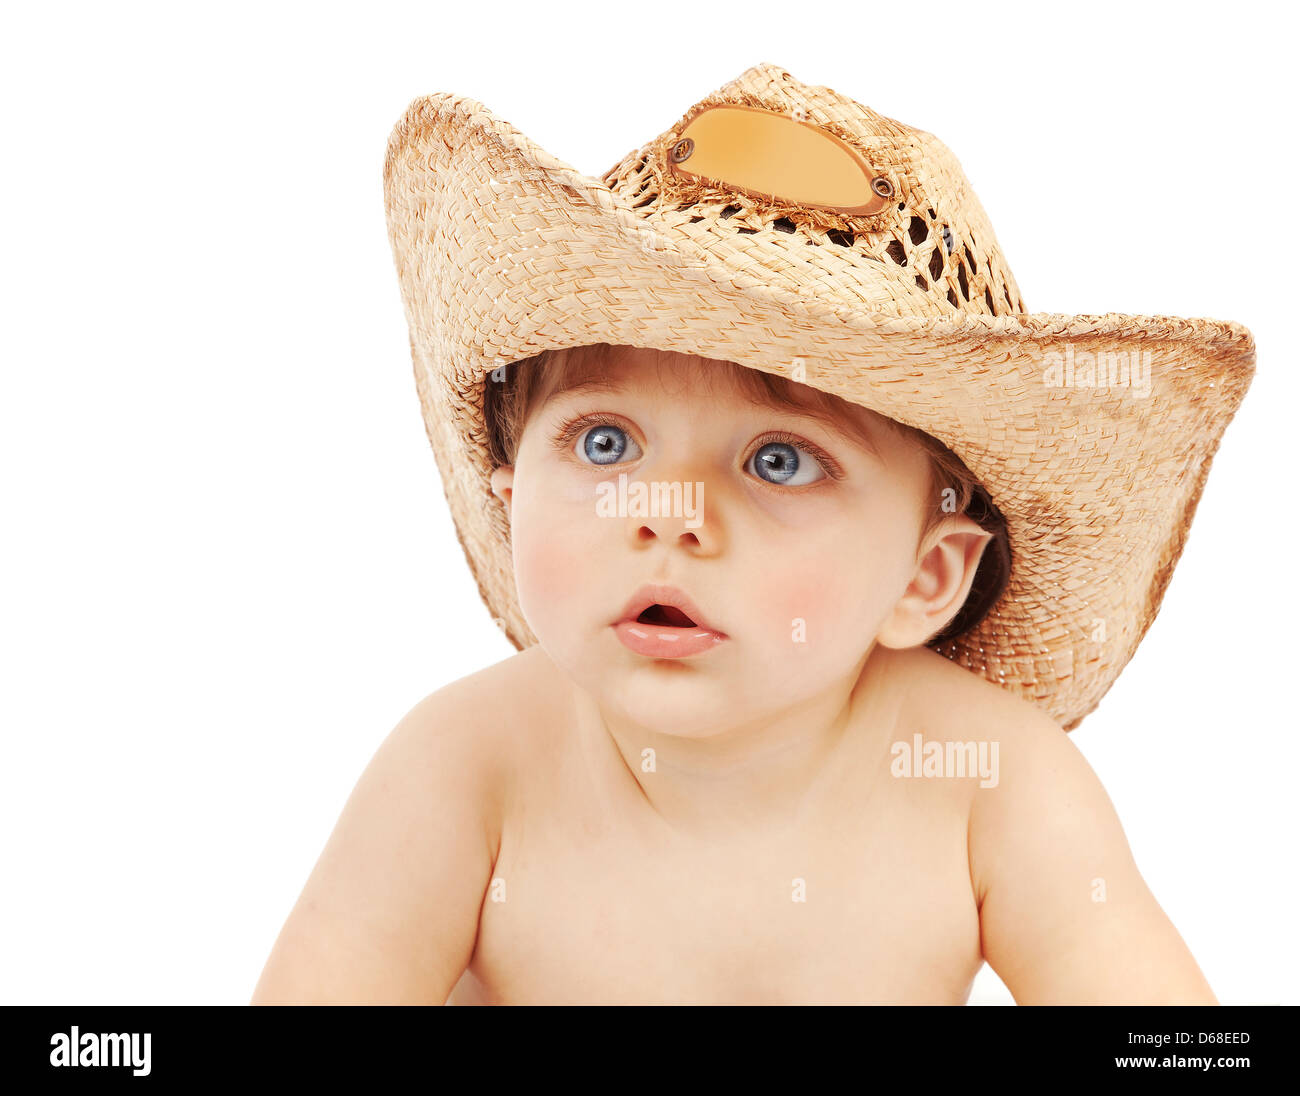 Closeup portrait of adorable baby boy wearing cowboy hat isolated on white background, happy childhood concept Stock Photo